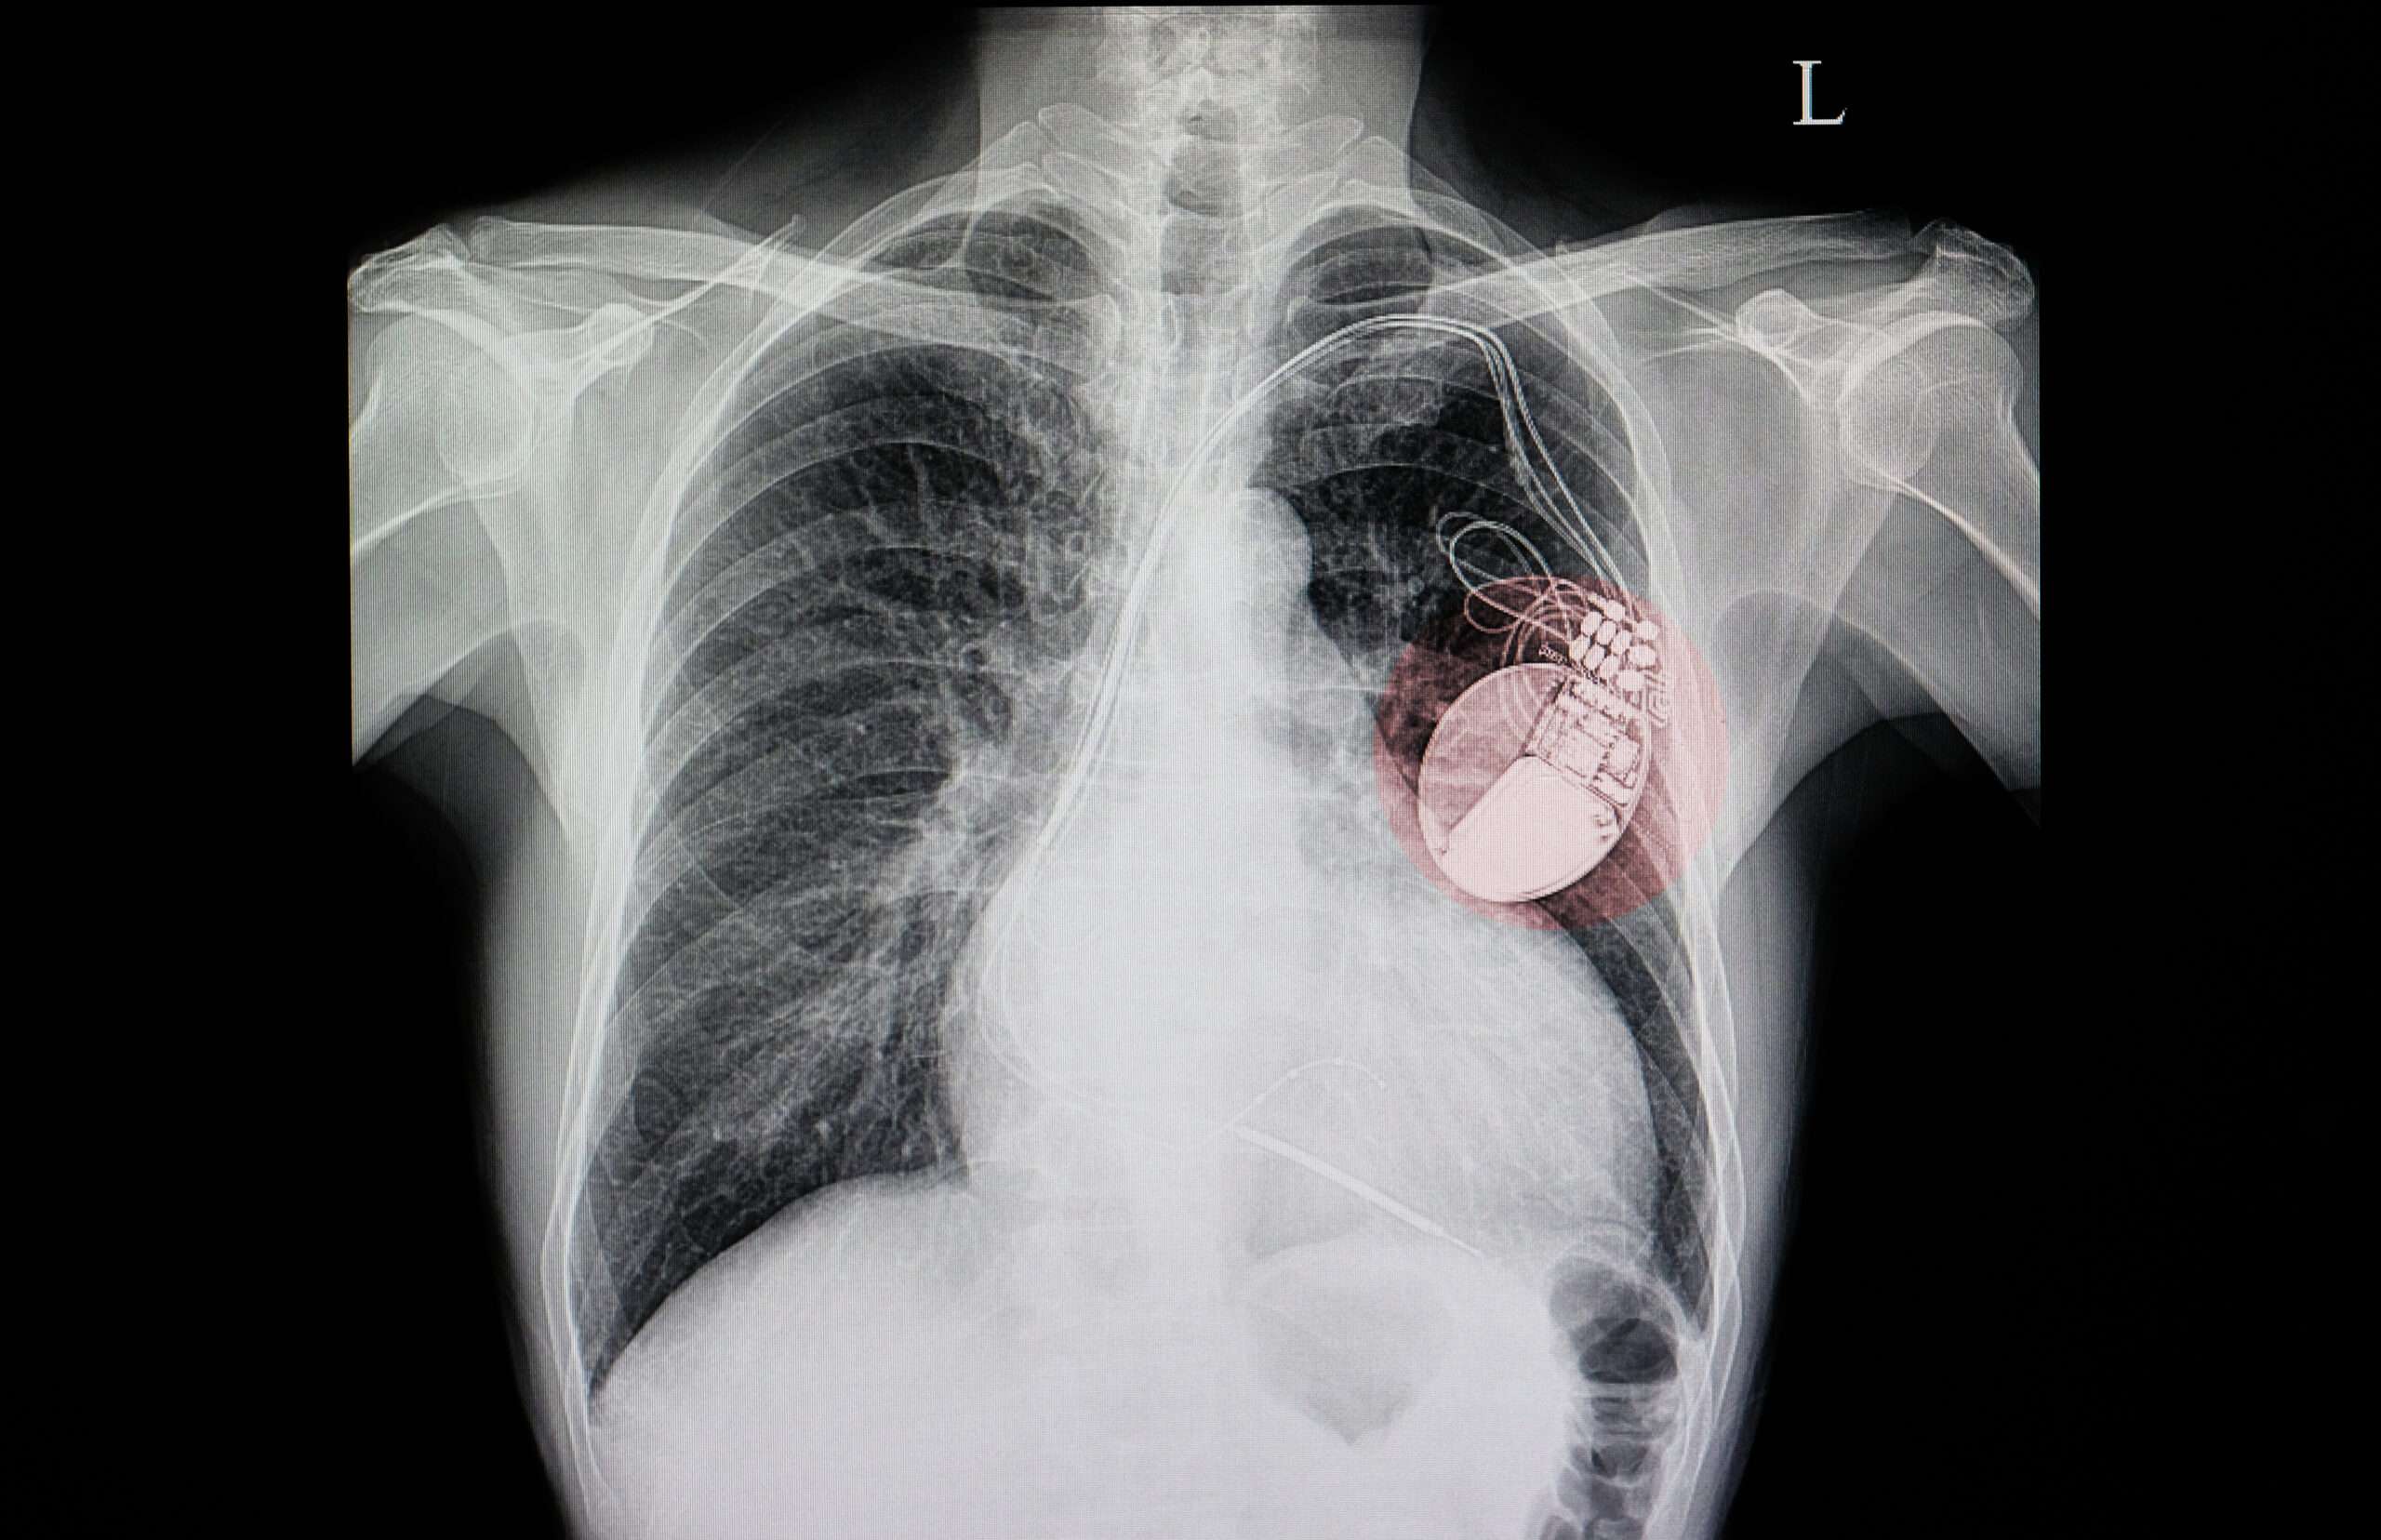 Pacemakers Might Be Vulnerable to Hackers